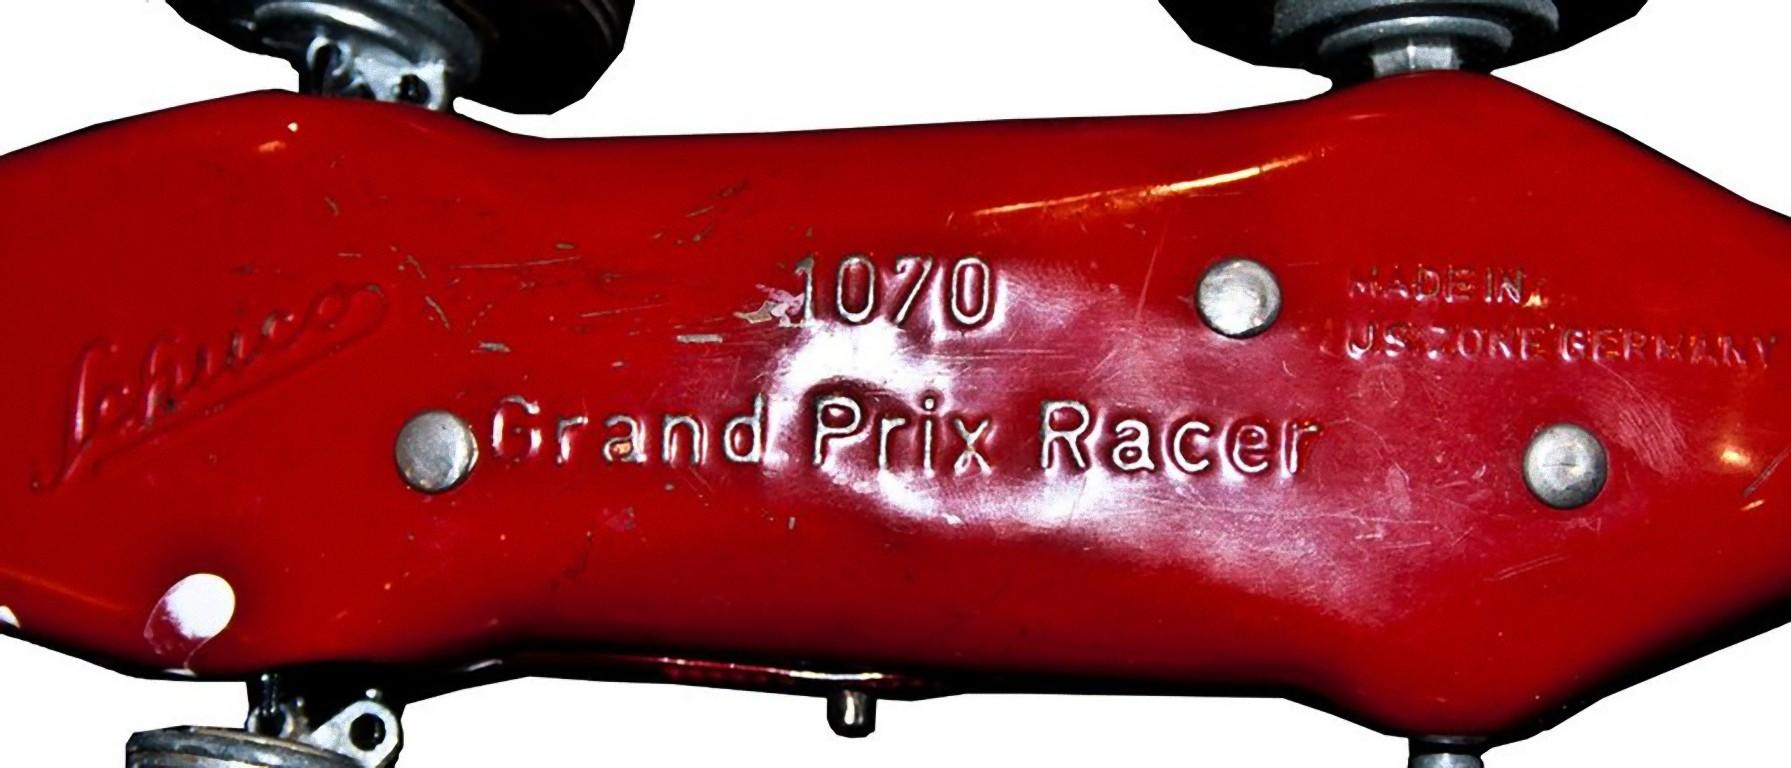 This Wind up Schuco Grand Prix Racer 1070 car is an original mechanical toy, made in 1950s.

Vintage wind up mechanical toy car.

Made in U.S. zone Germany by Schuco in 1950s.

Model N. Grand Prix Racer 1070.

Made in tinplate with rubber